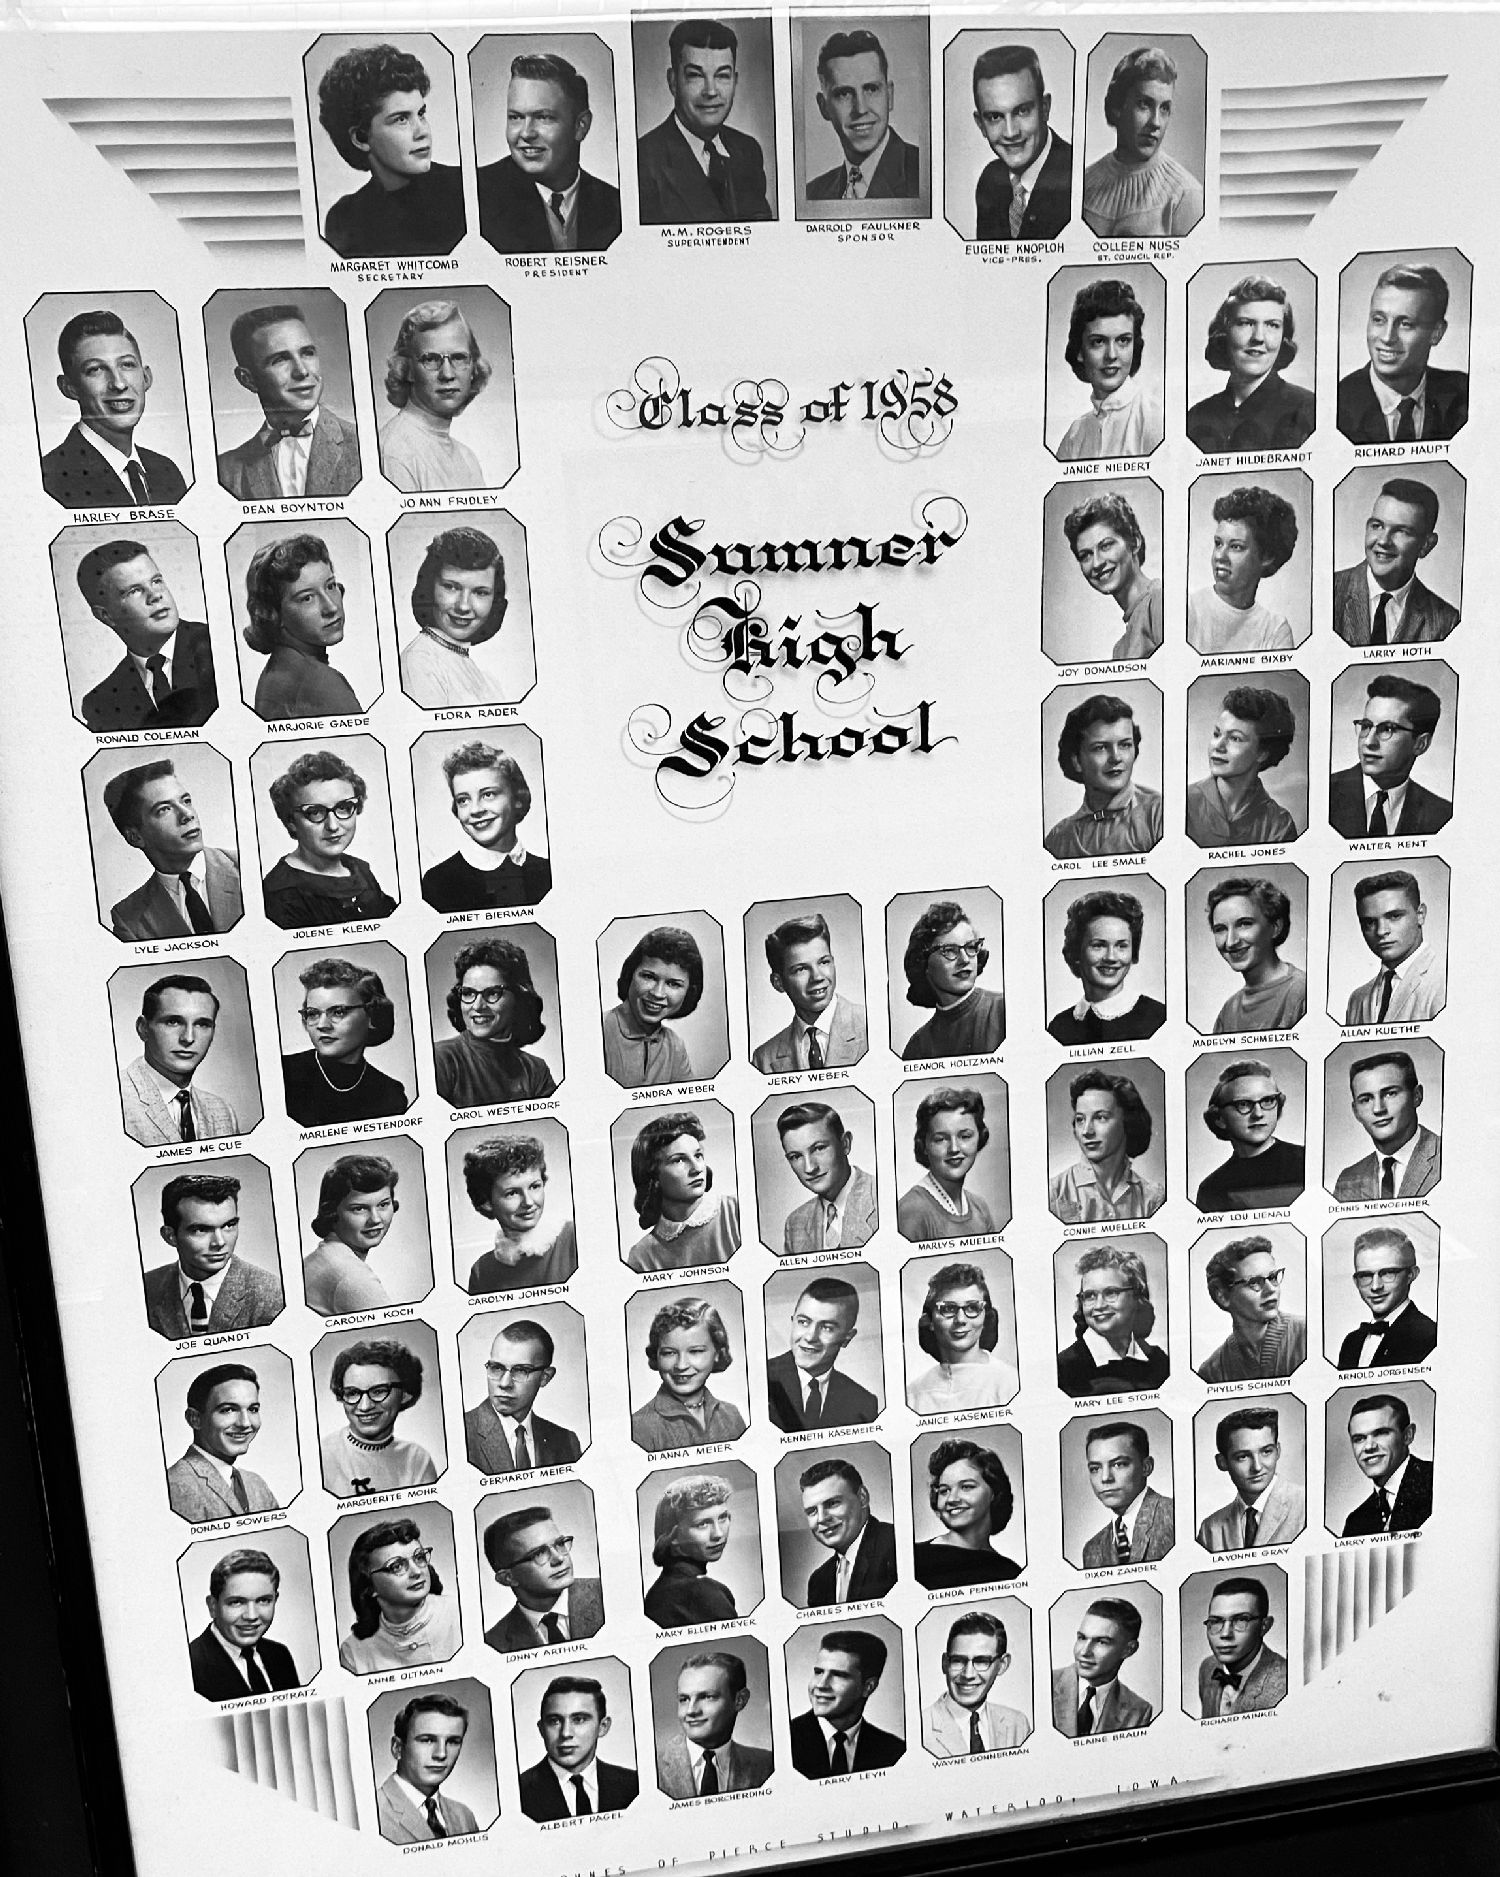 Sumner Memories Are Forever - Class of 1958